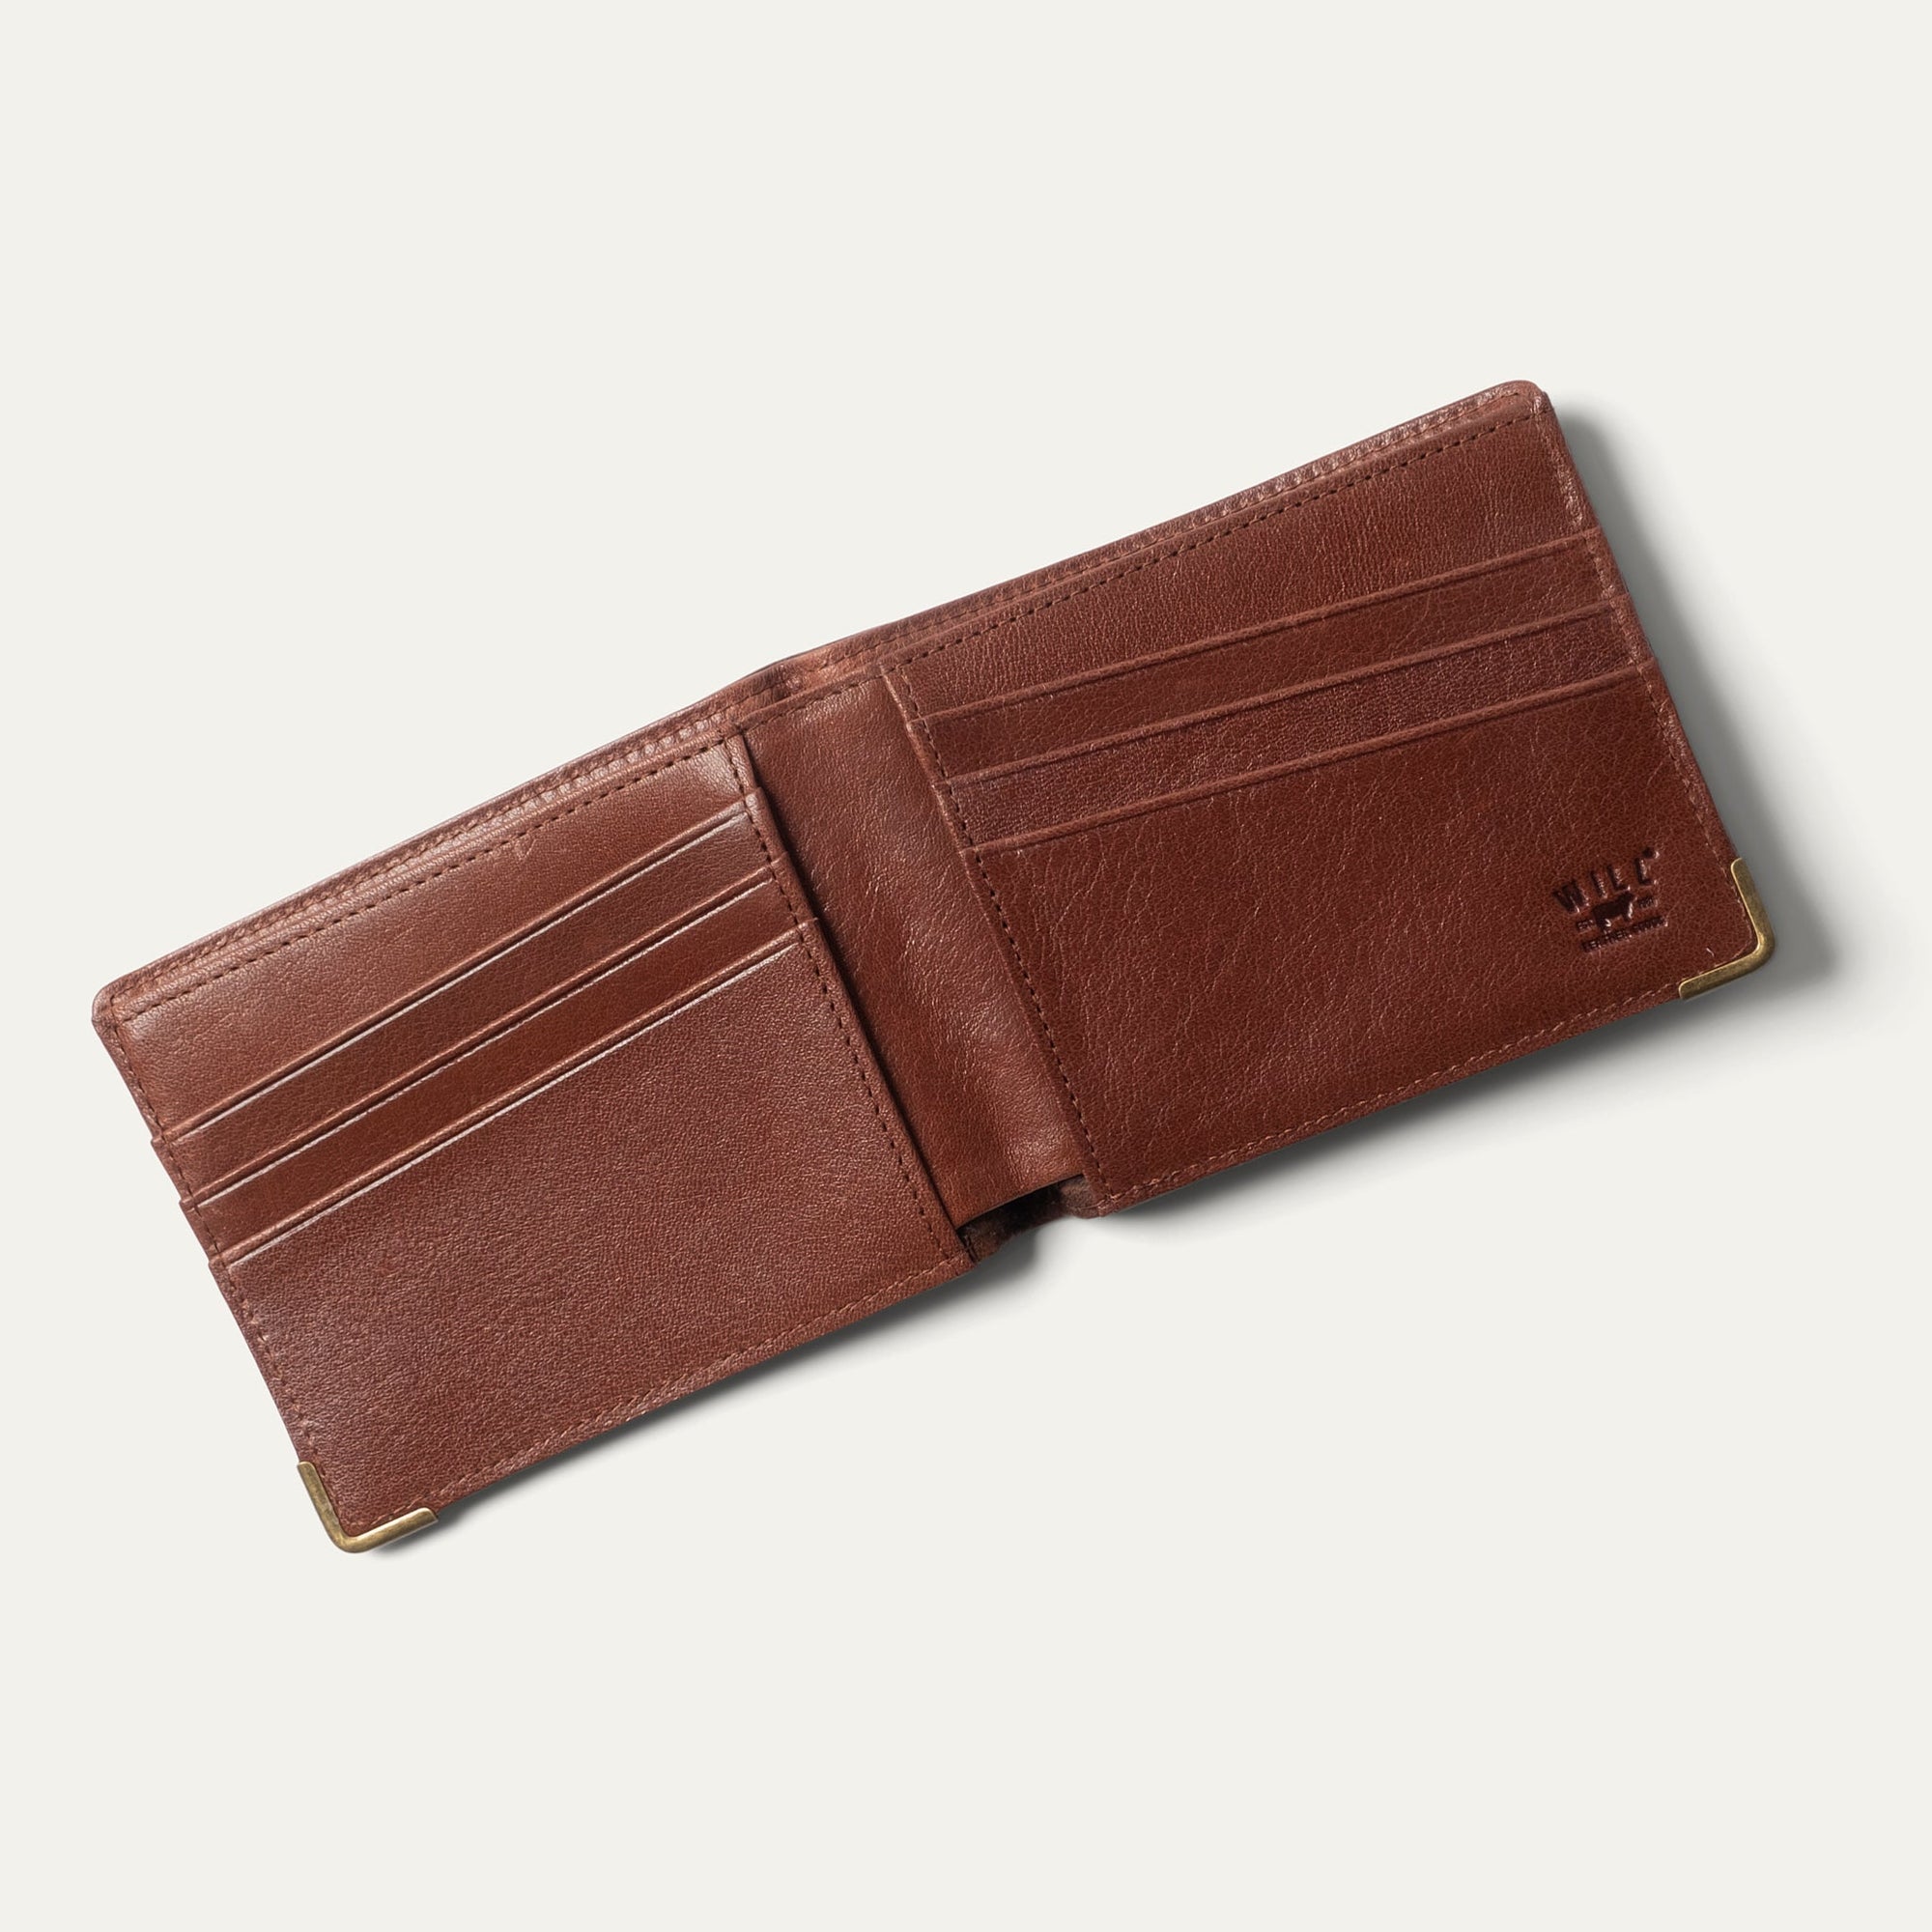 William Italian Leather Billfold Wallet in Brown by Will Leather Goods